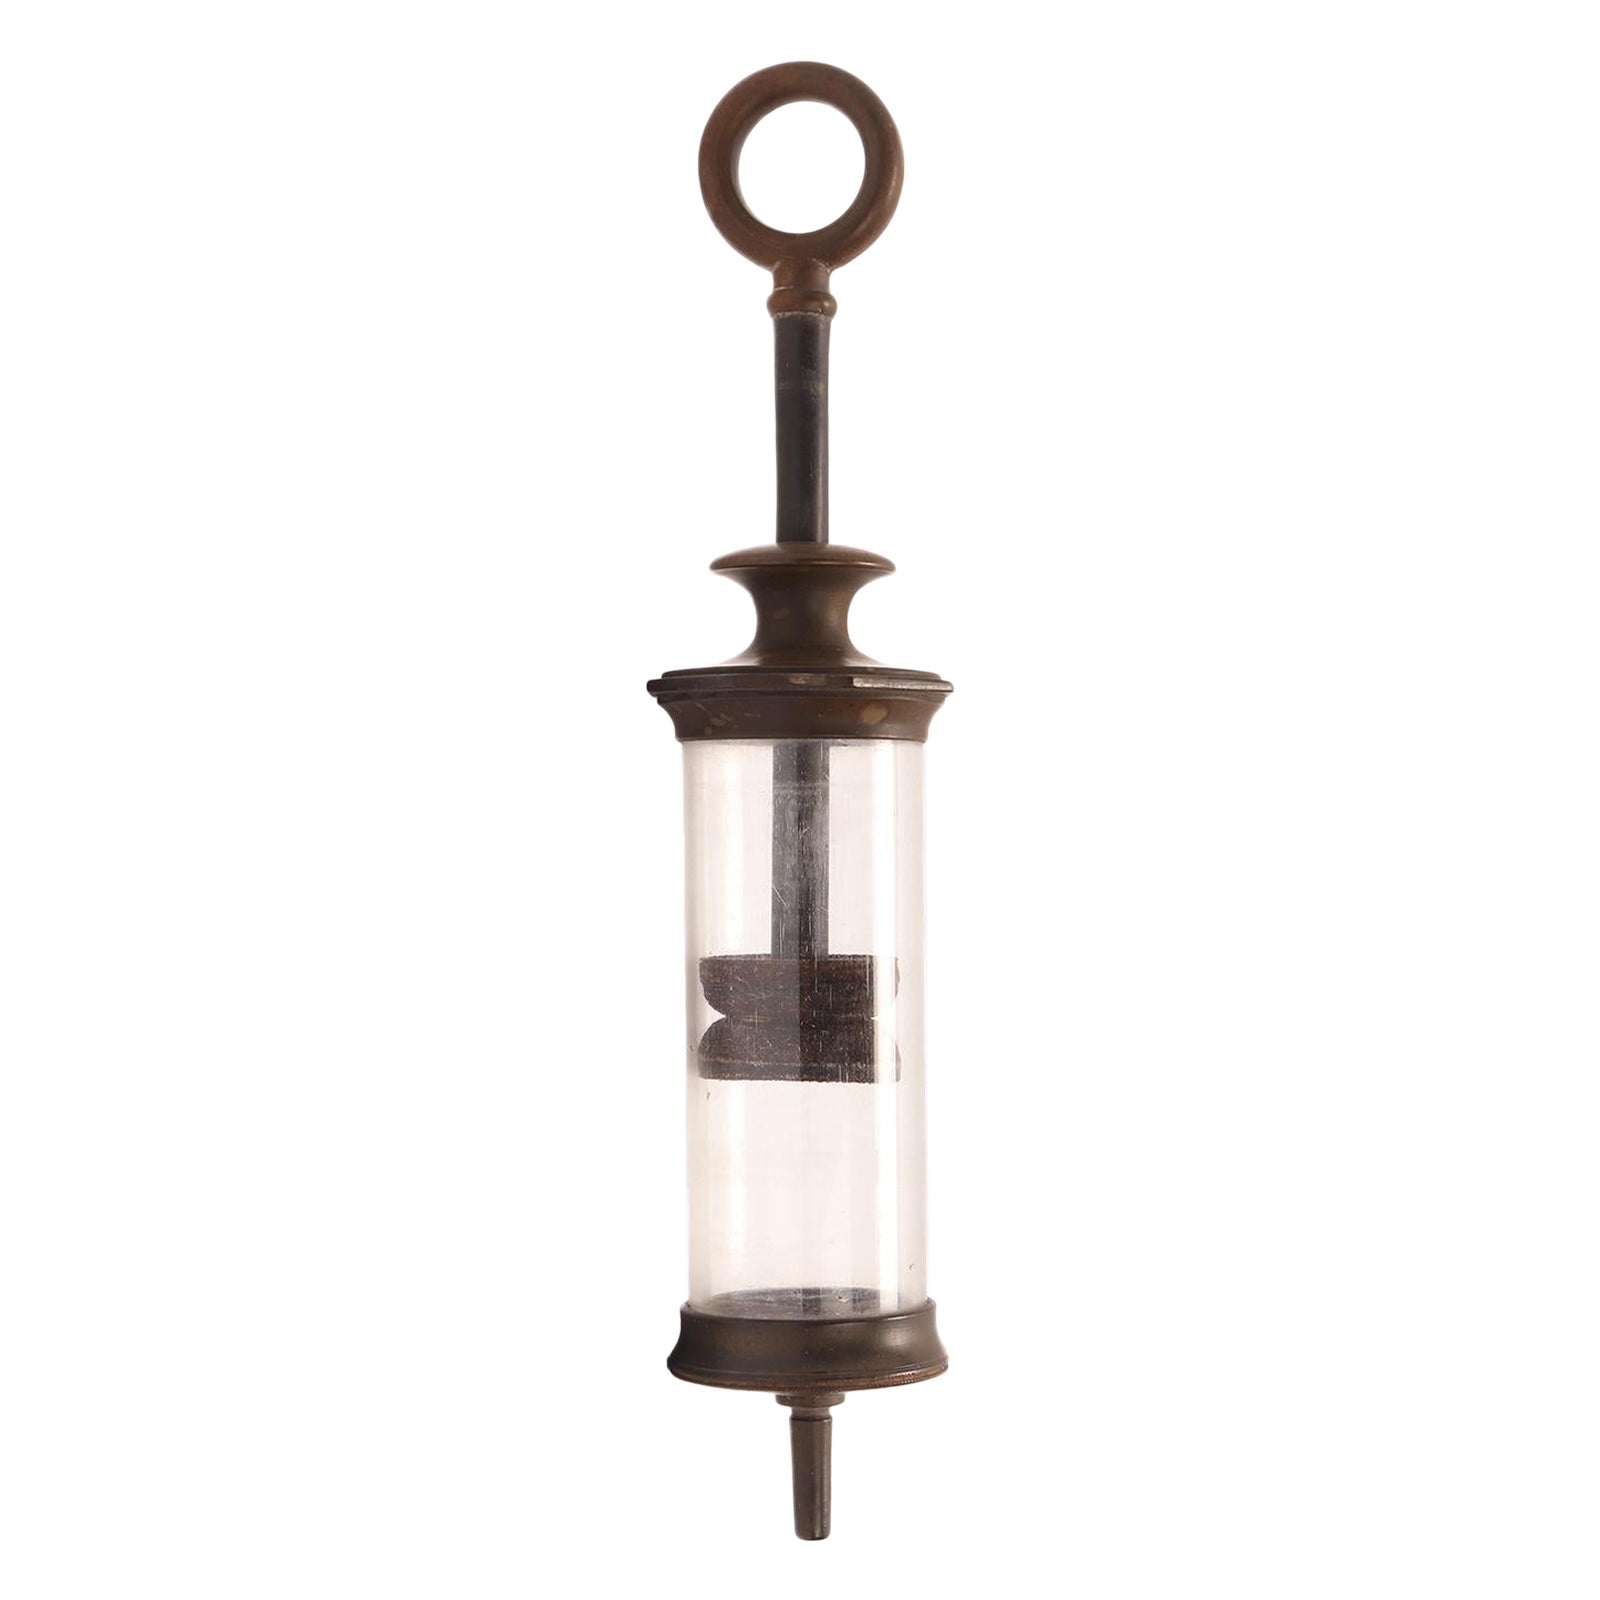 A glass and vulcanite syringe, London 1880.  For Sale